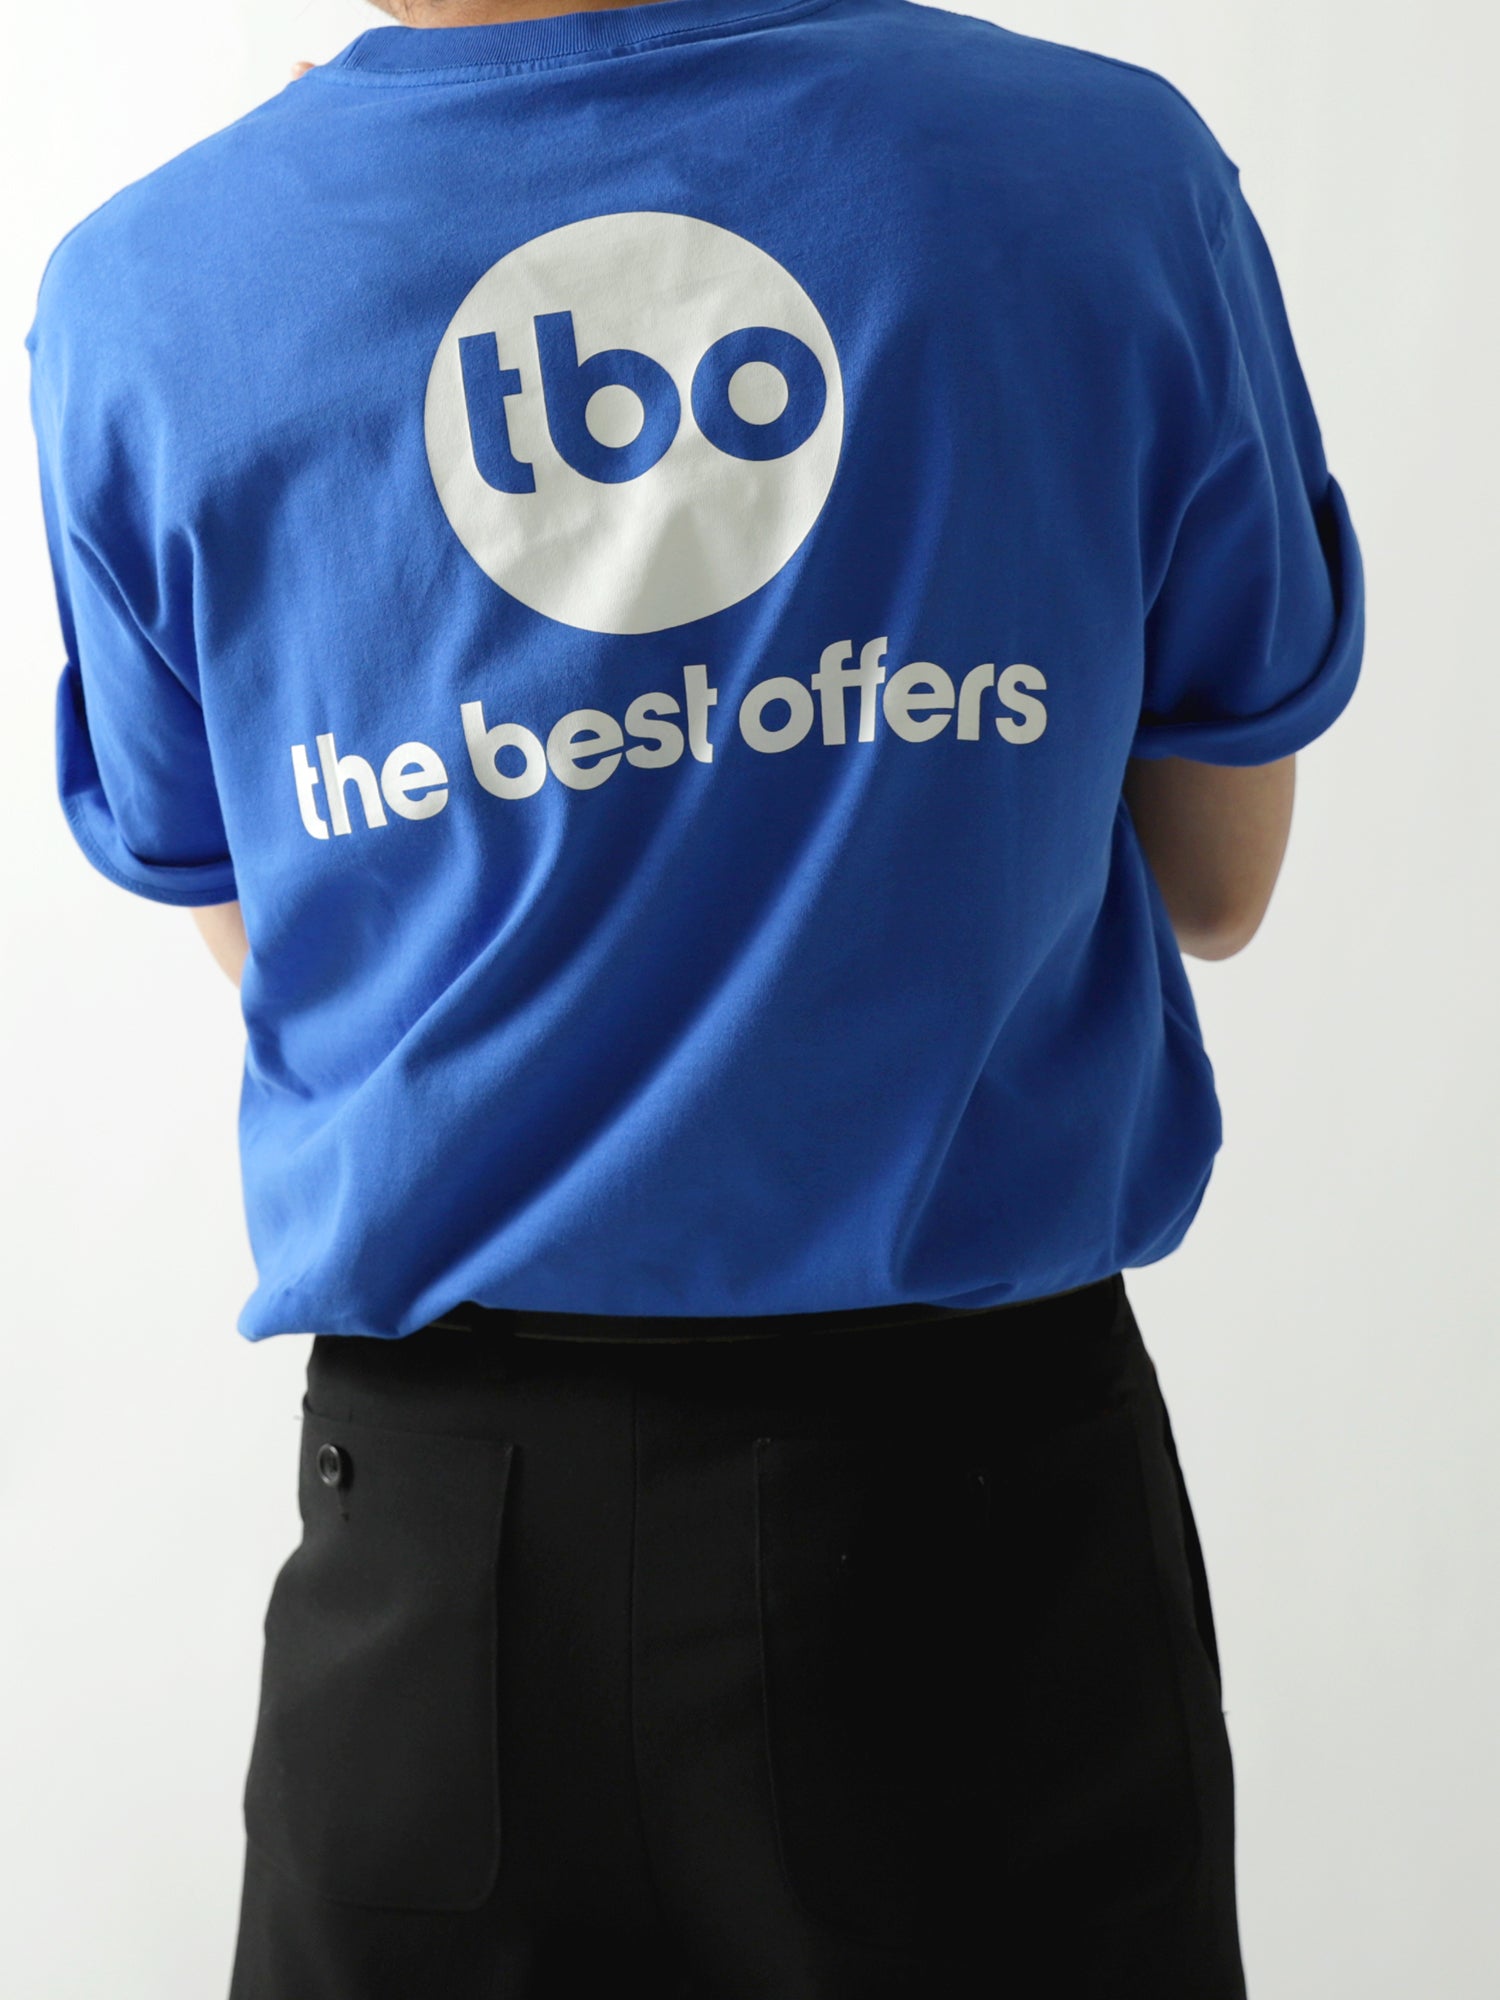 the best offers "tbo LOGO" 8.1oz TEE